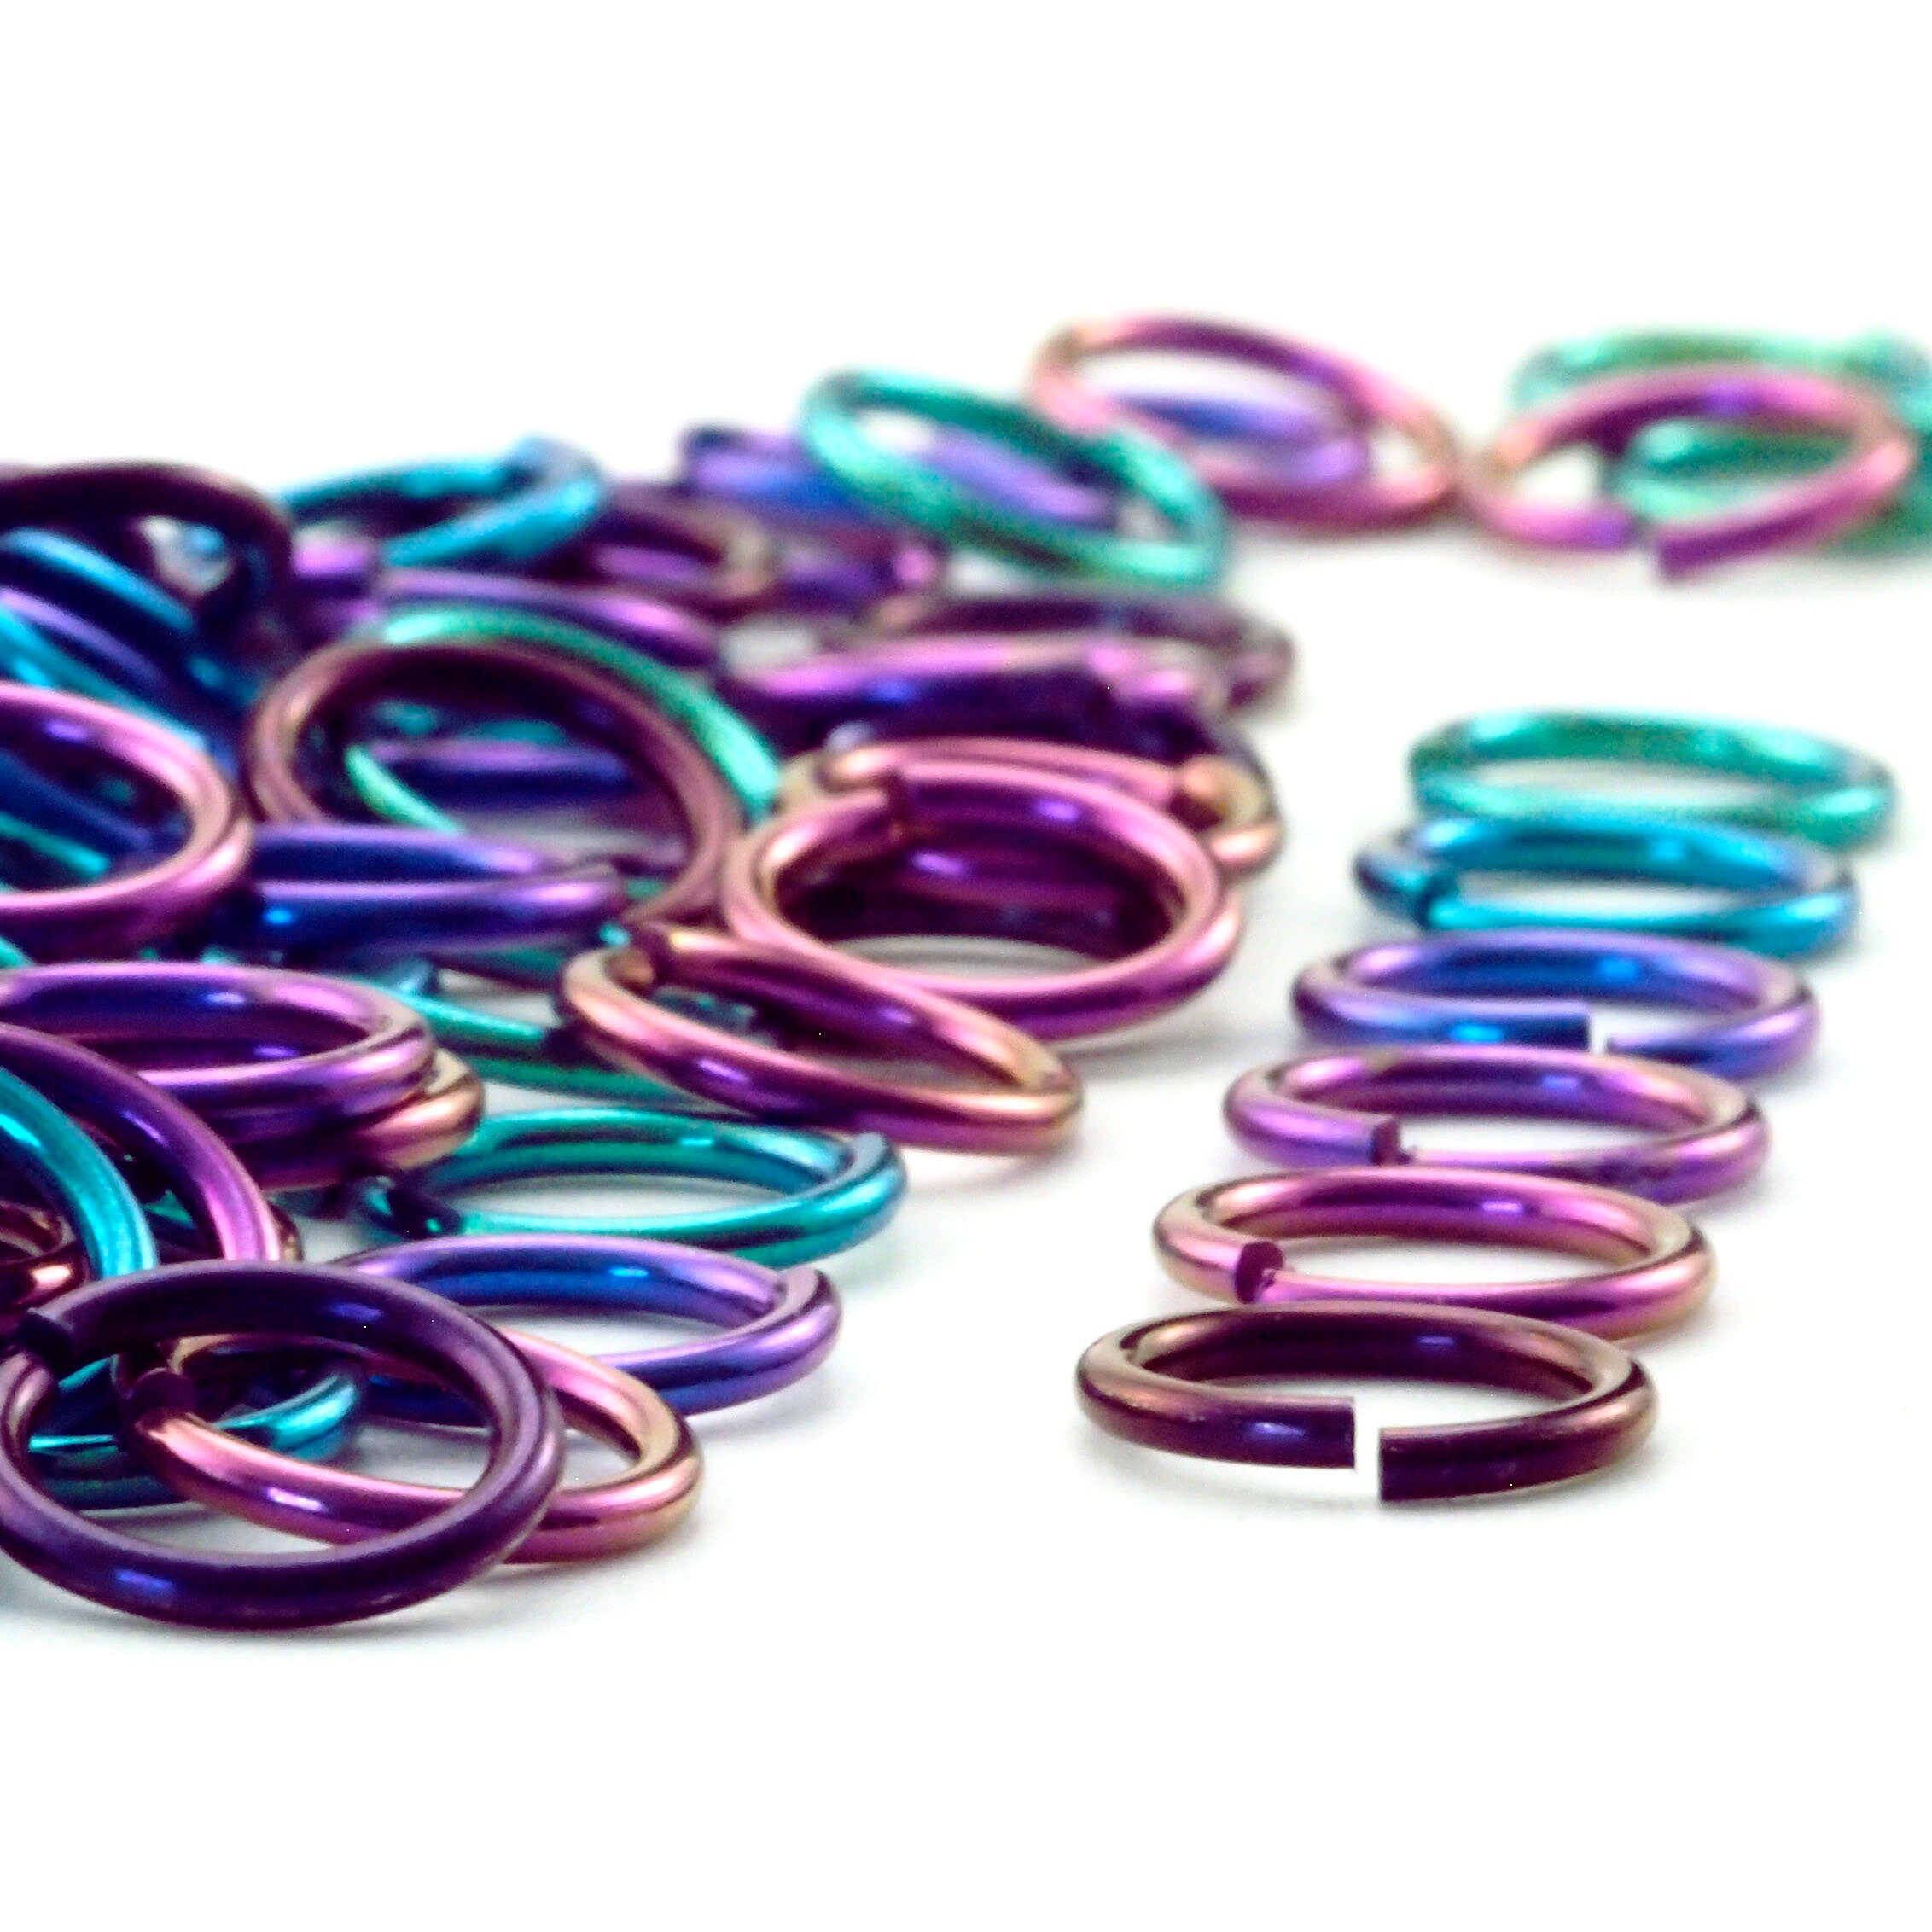 100 Glossy Black Anodized Niobium Jump Rings in Your Pick of